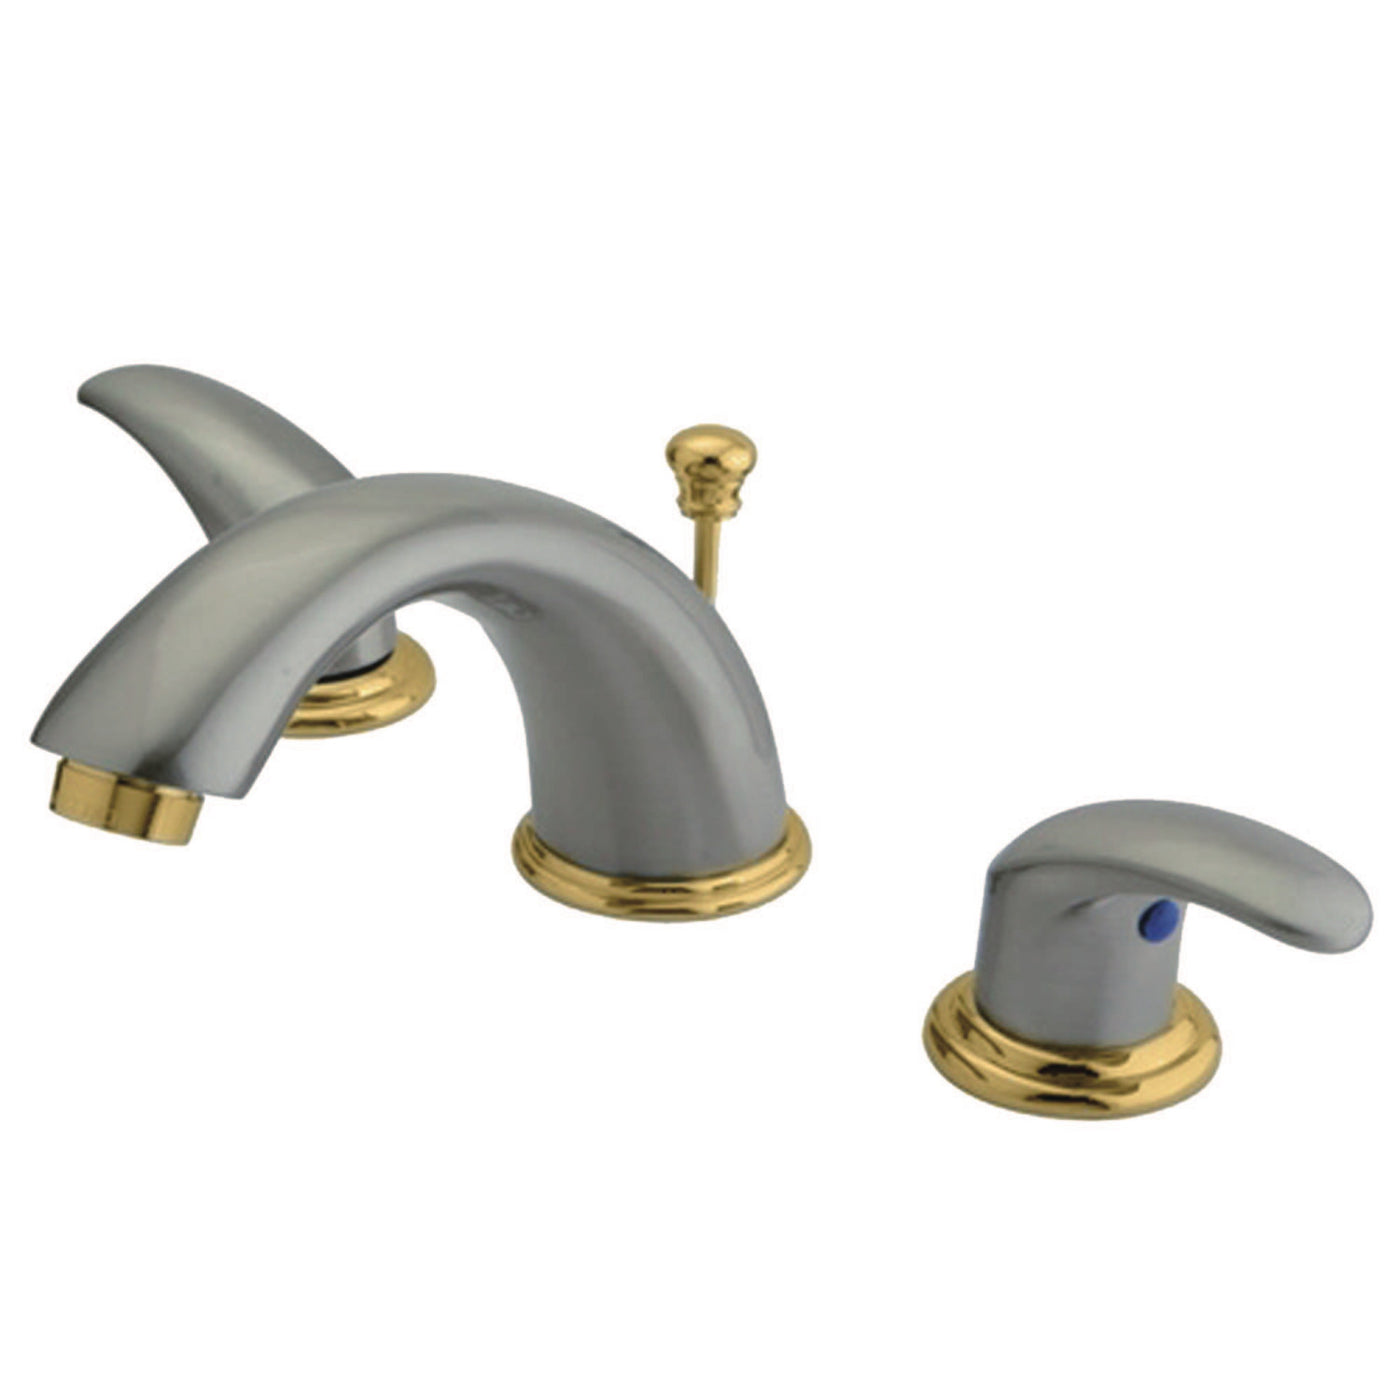 Elements of Design EB6969LL Widespread Bathroom Faucet with Retail Pop-Up, Brushed Nickel/Polished Brass